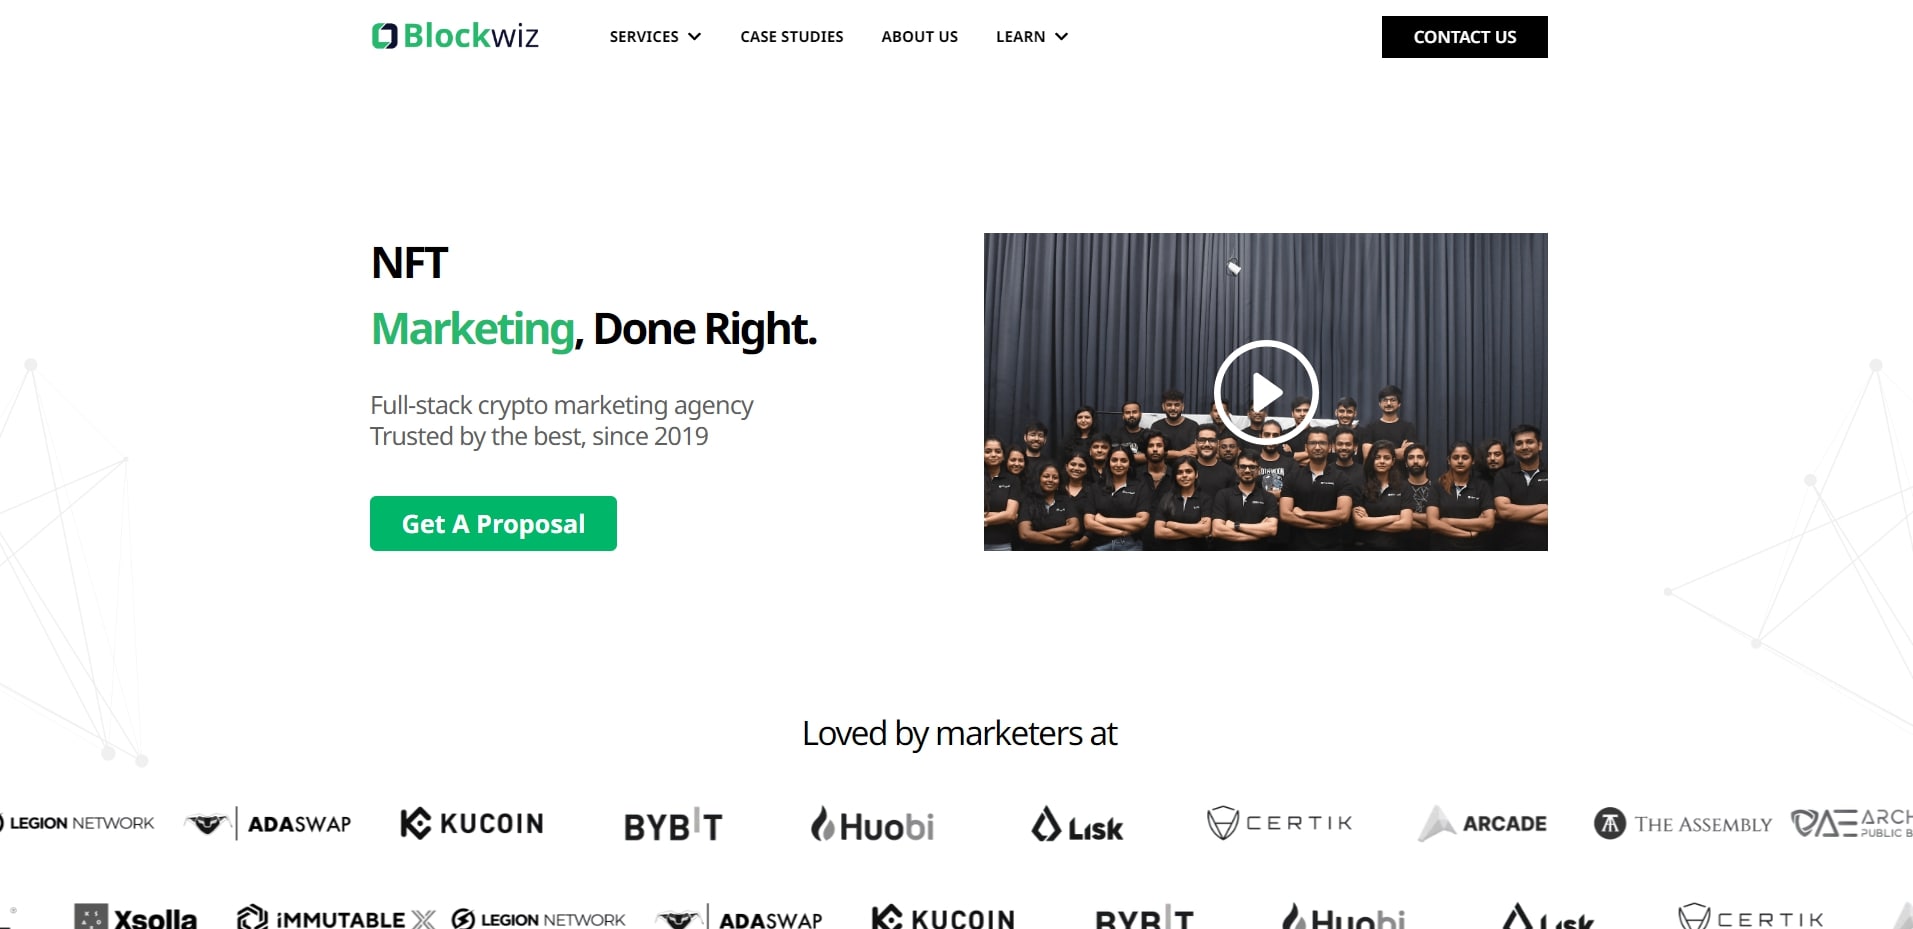 BlockWiz is one of the top-rated crypto PR agencies